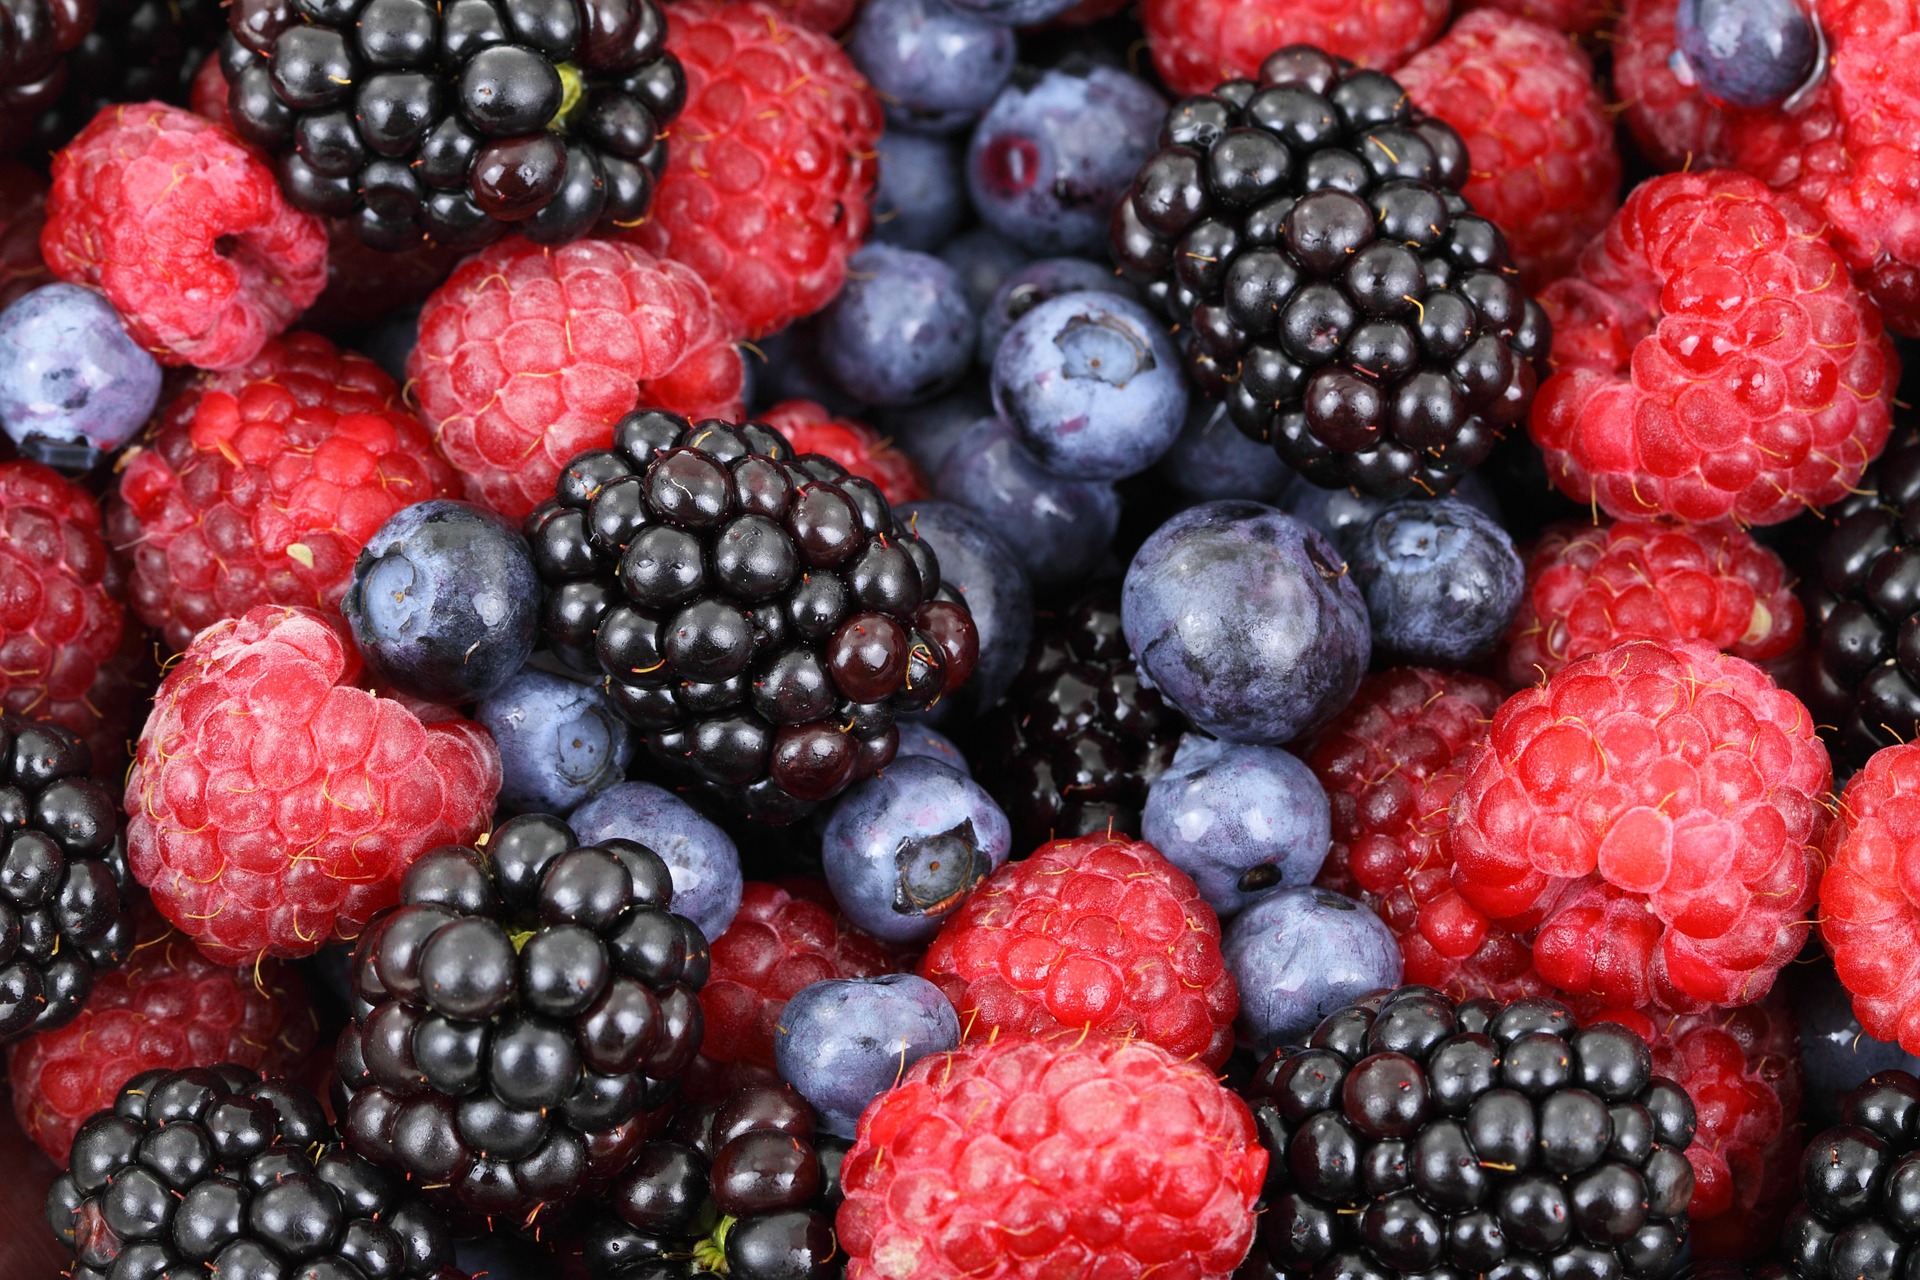 New health benefits discovered in berry pigment